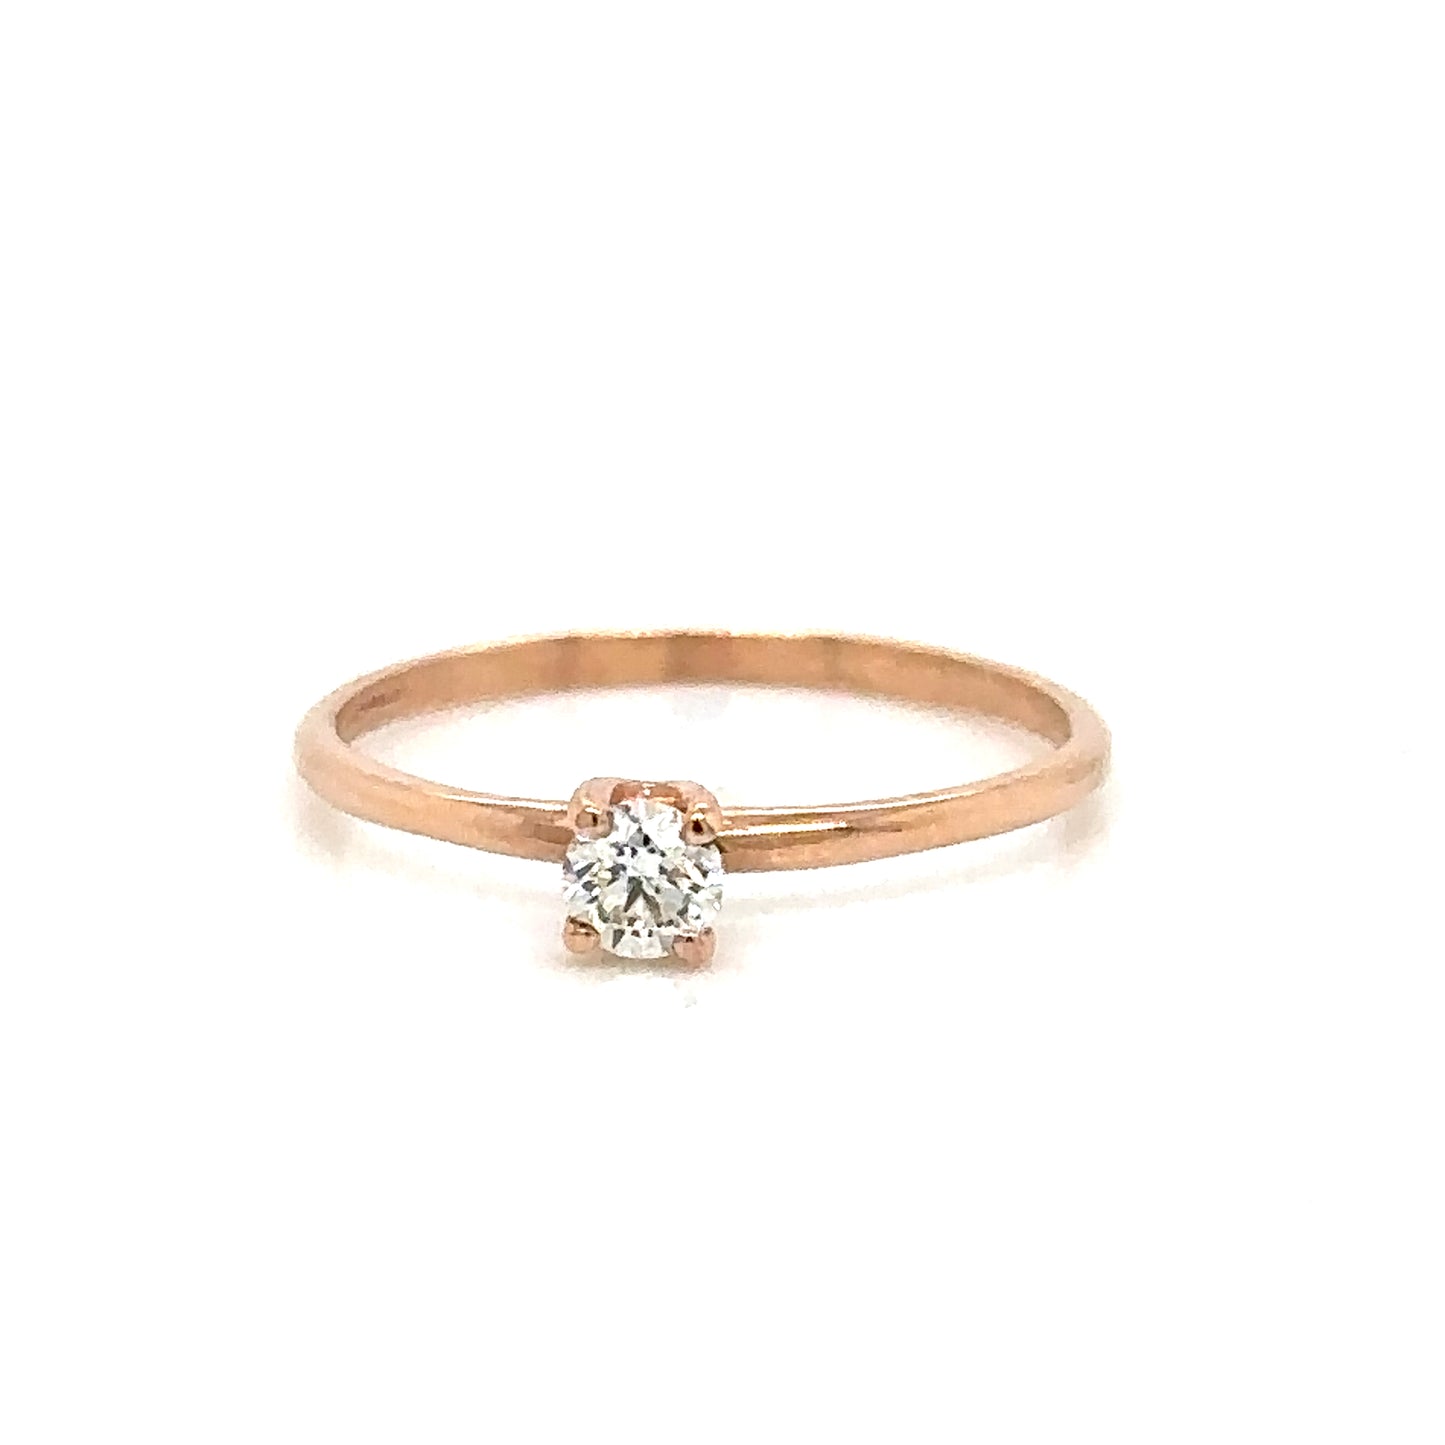 IMMEDIATE DELIVERY / 0.20ct Diamond Solitaire Ring / 14k Rose Gold / Size 6.75